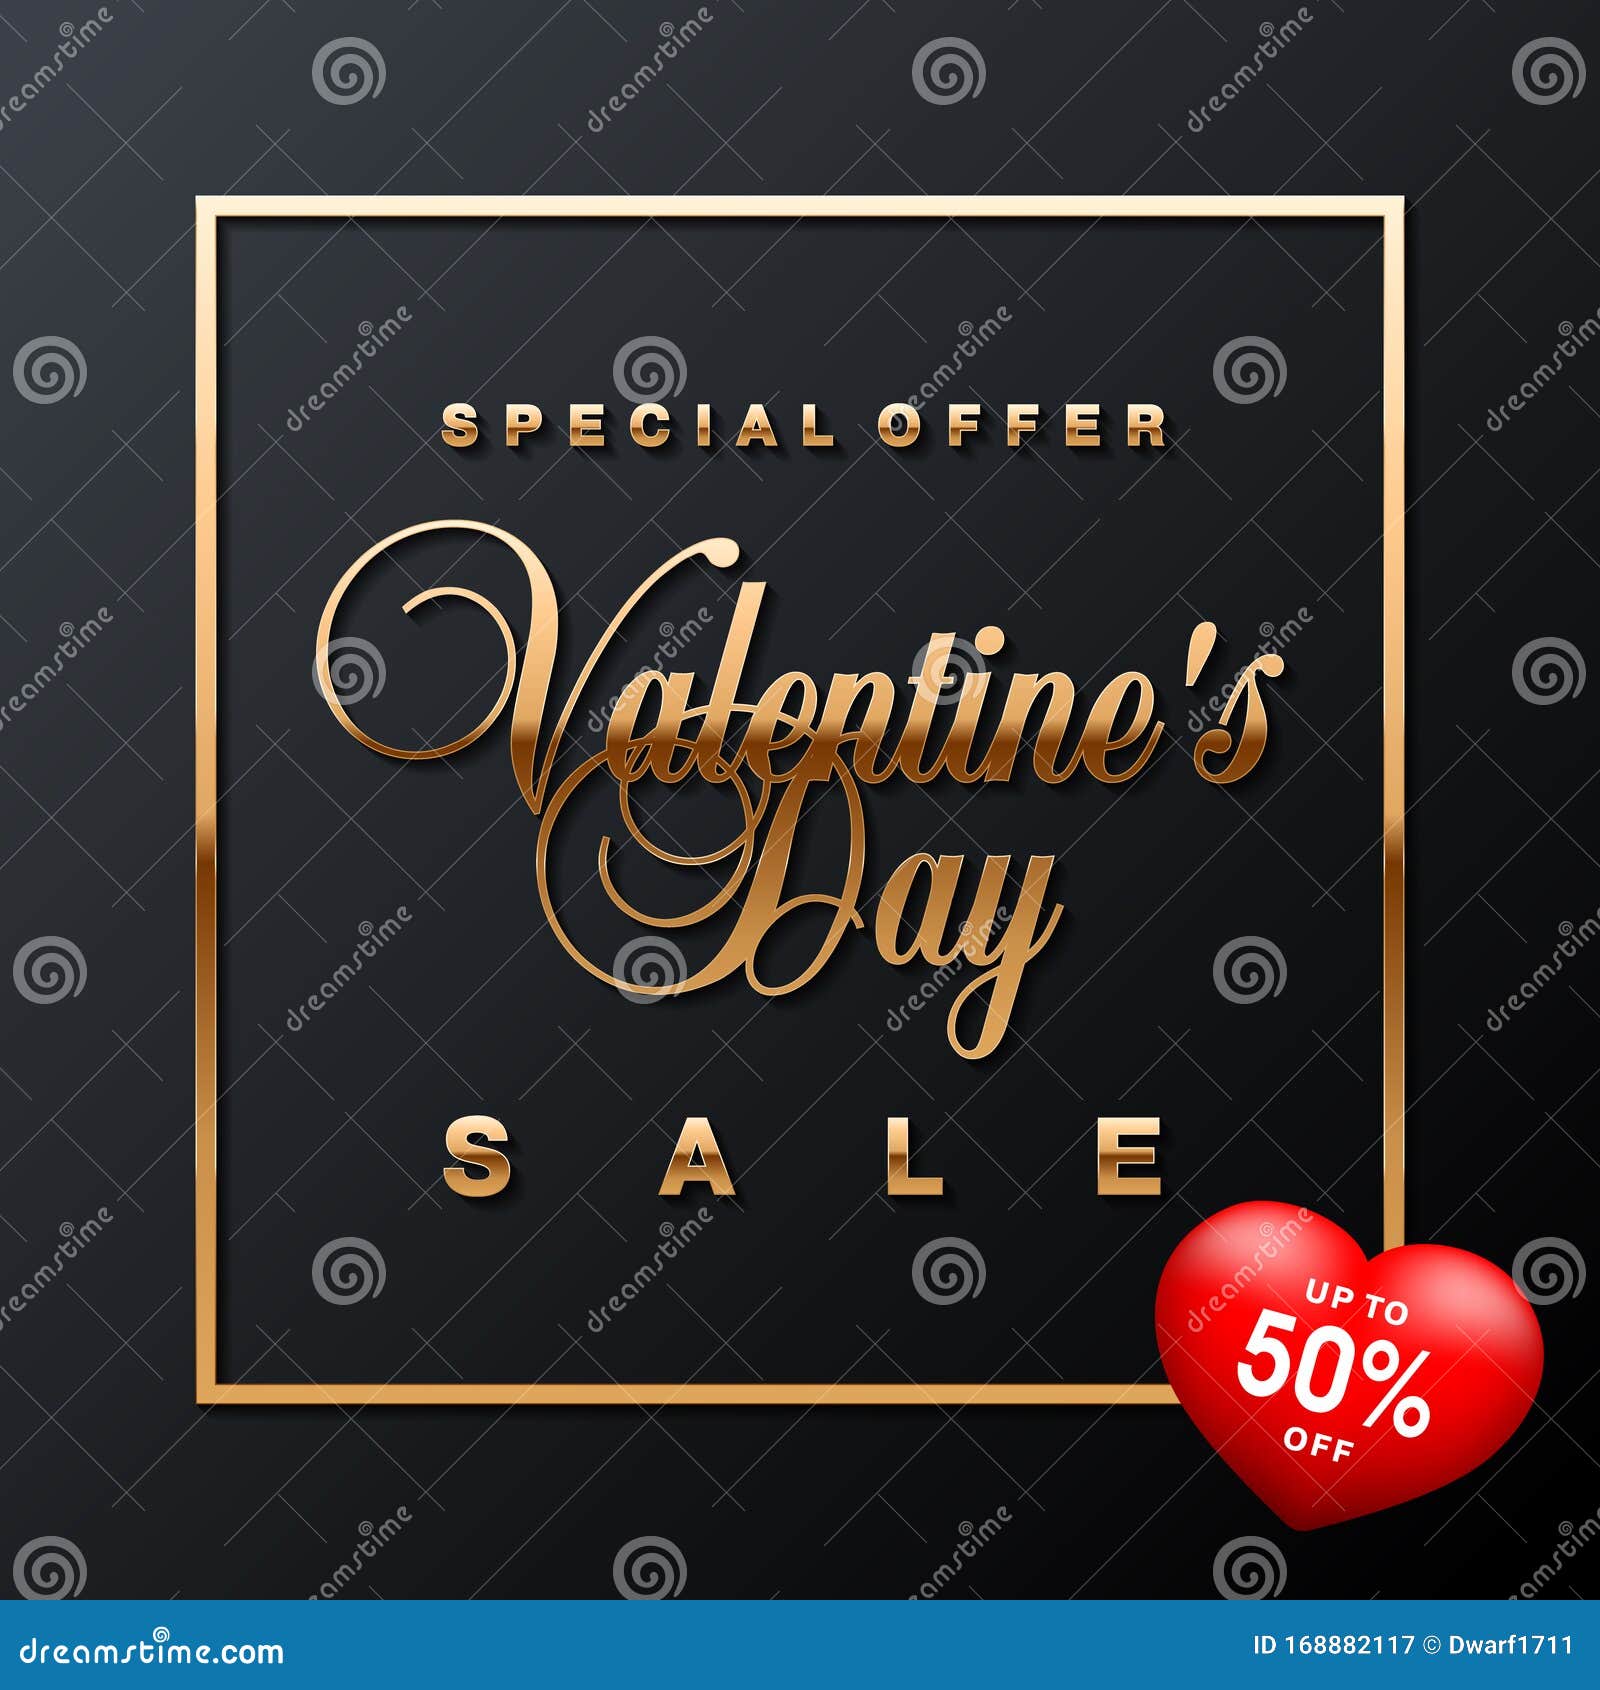 Luxury Valentines Day sale special offer, discount, advertising campaign square vector banner, flyer, poster, voucher, social network post template with golden text on black background with red heart with discount 